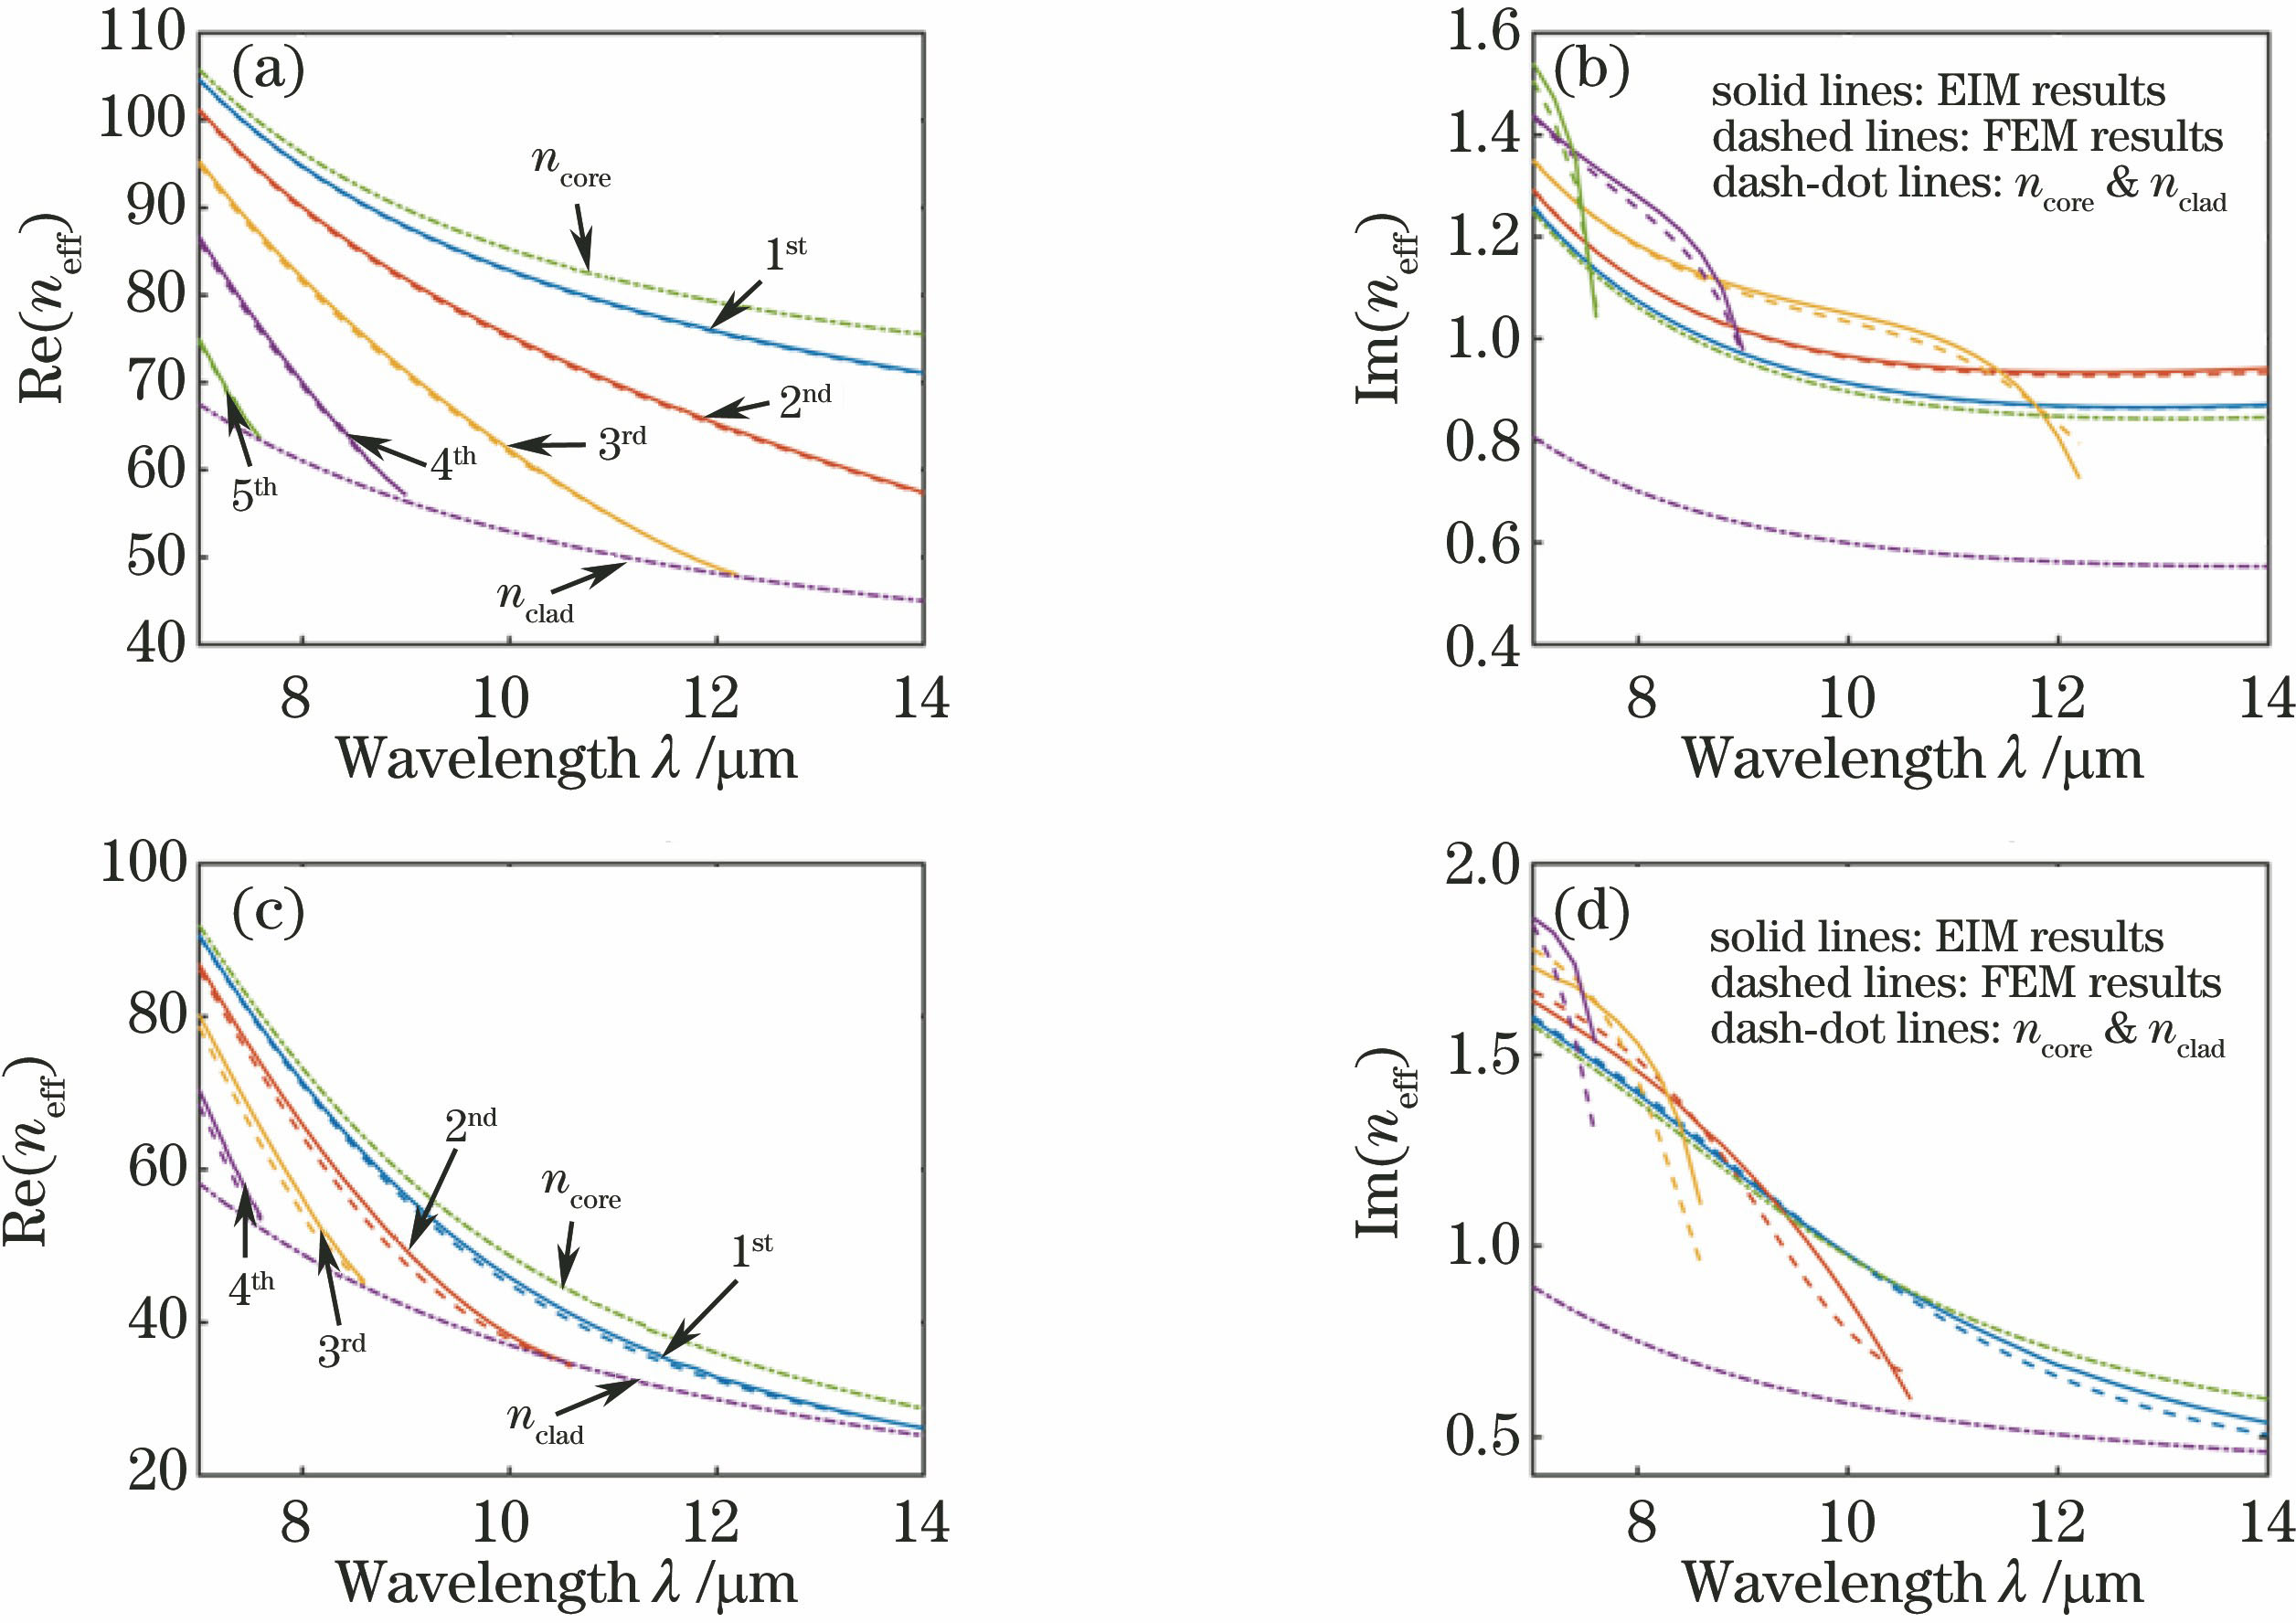 Effective refractive index of GSPP mode versus wavelength in DLTGSSPW with w=200 nm and d0=30 nm. (a) Symmetric mode, Re(neff); (b) symmetric mode, Im(neff); (c) anti-symmetric mode, Re(neff); (d) anti-symmetric mode, Im(neff)